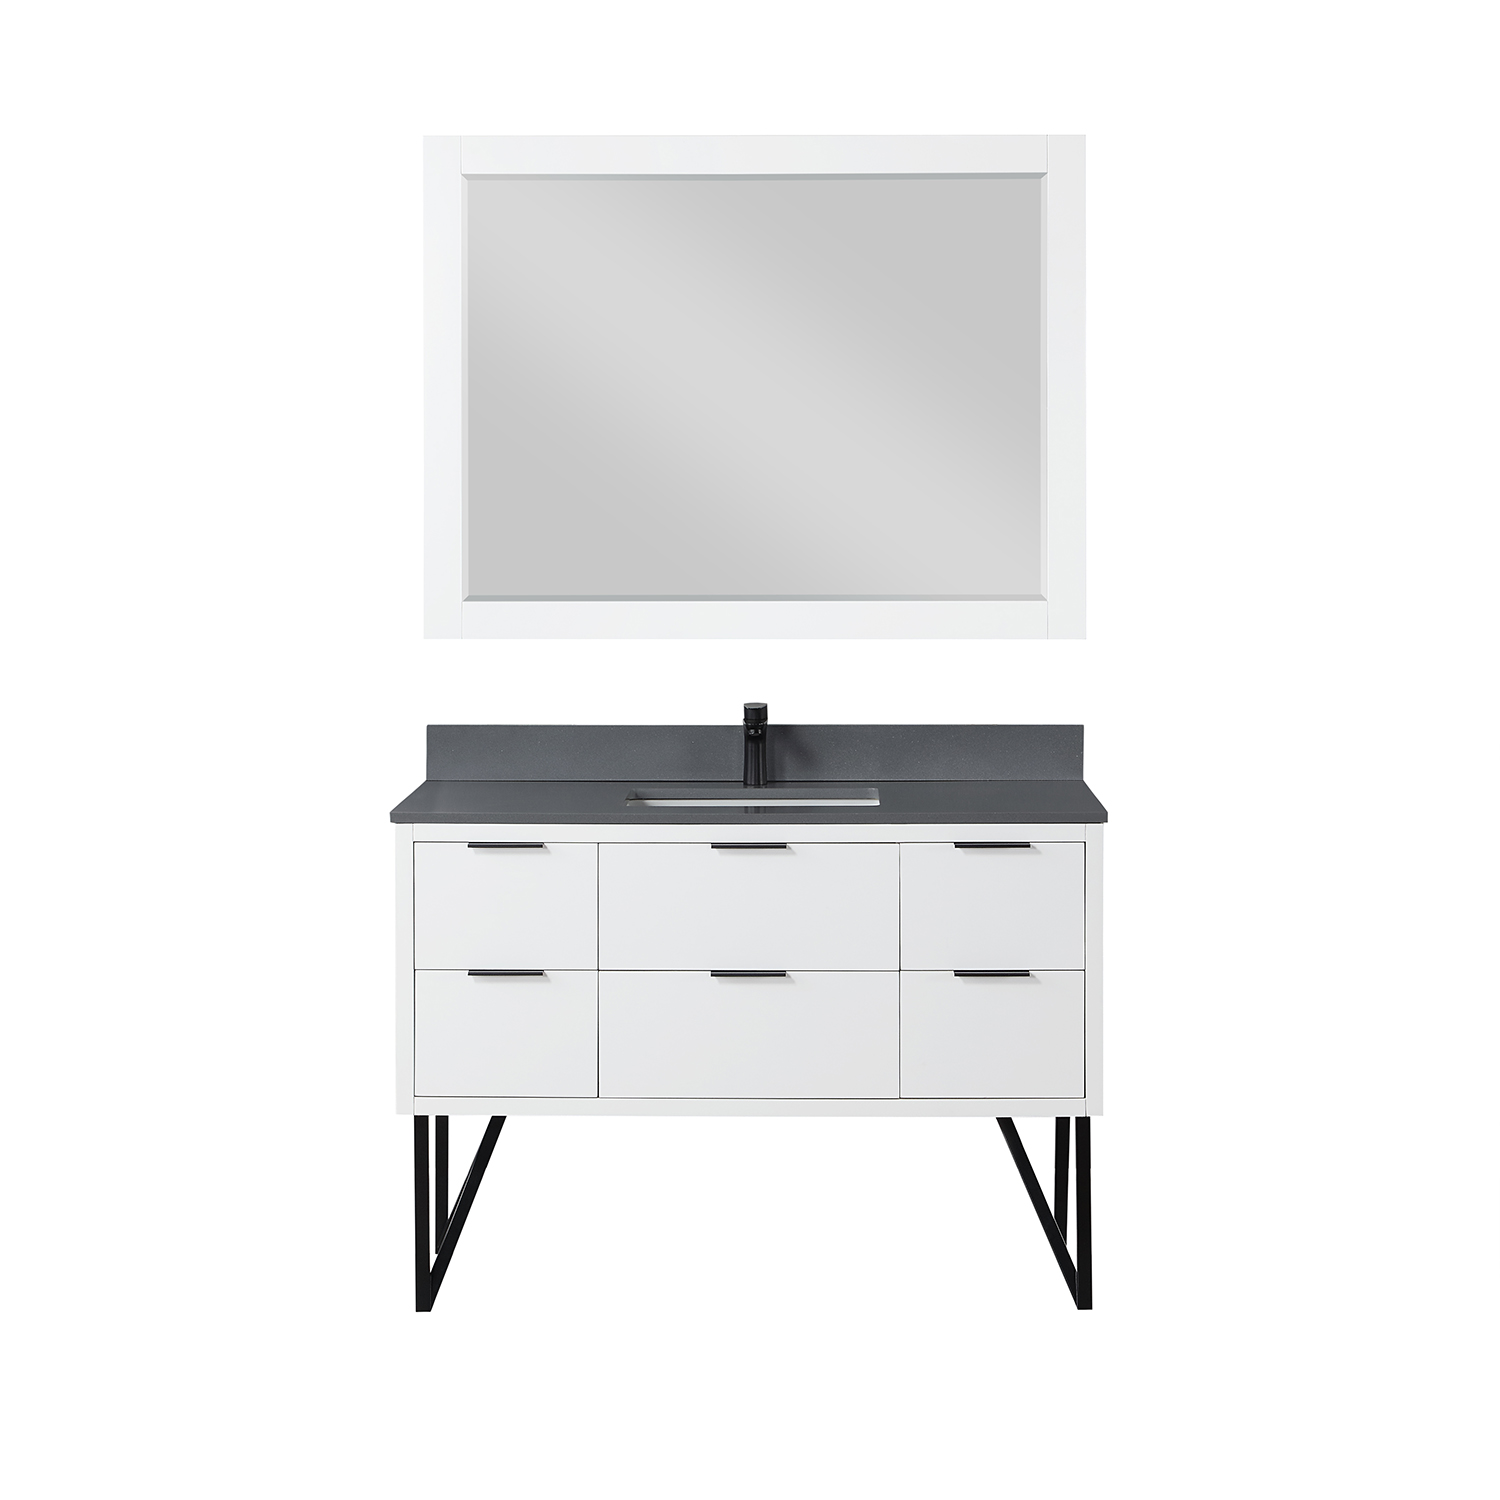 Issac Edwards Collection 48" Single Bathroom Vanity in White with Concrete Gray Composite Stone Countertop without Mirror